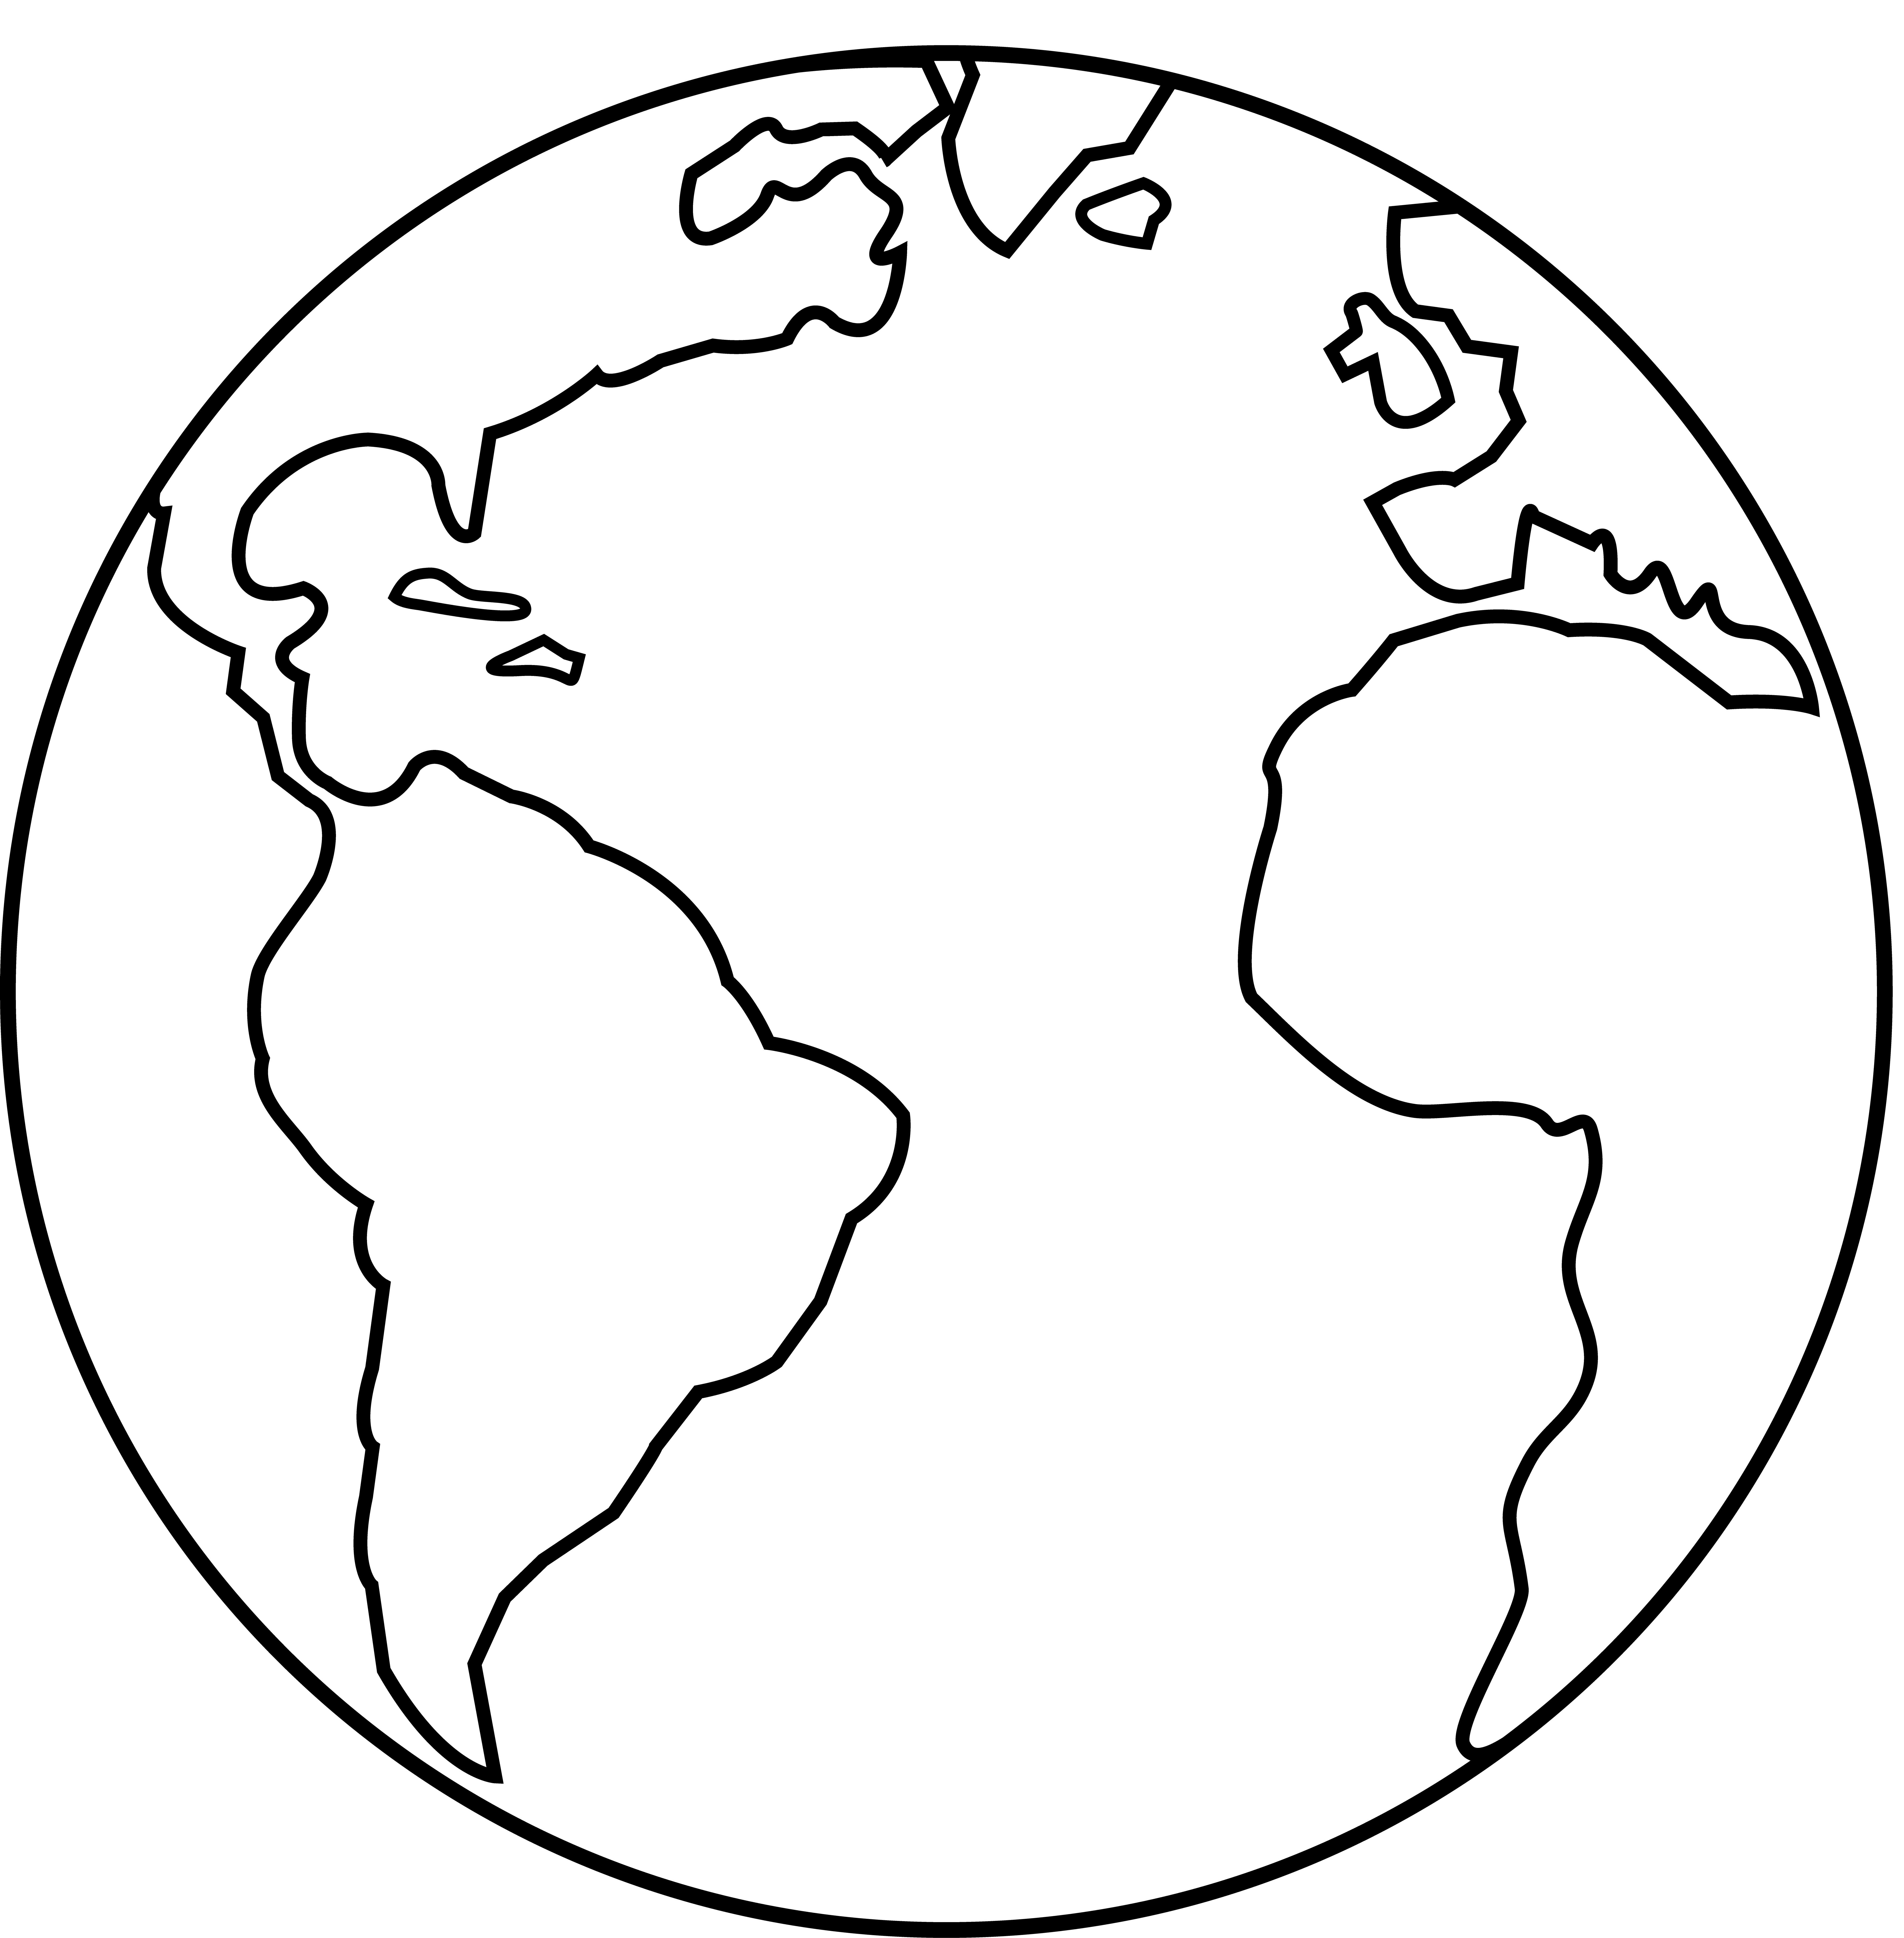 Vector Line Drawing Of Earth | Line Drawing - ClipArt Best ...